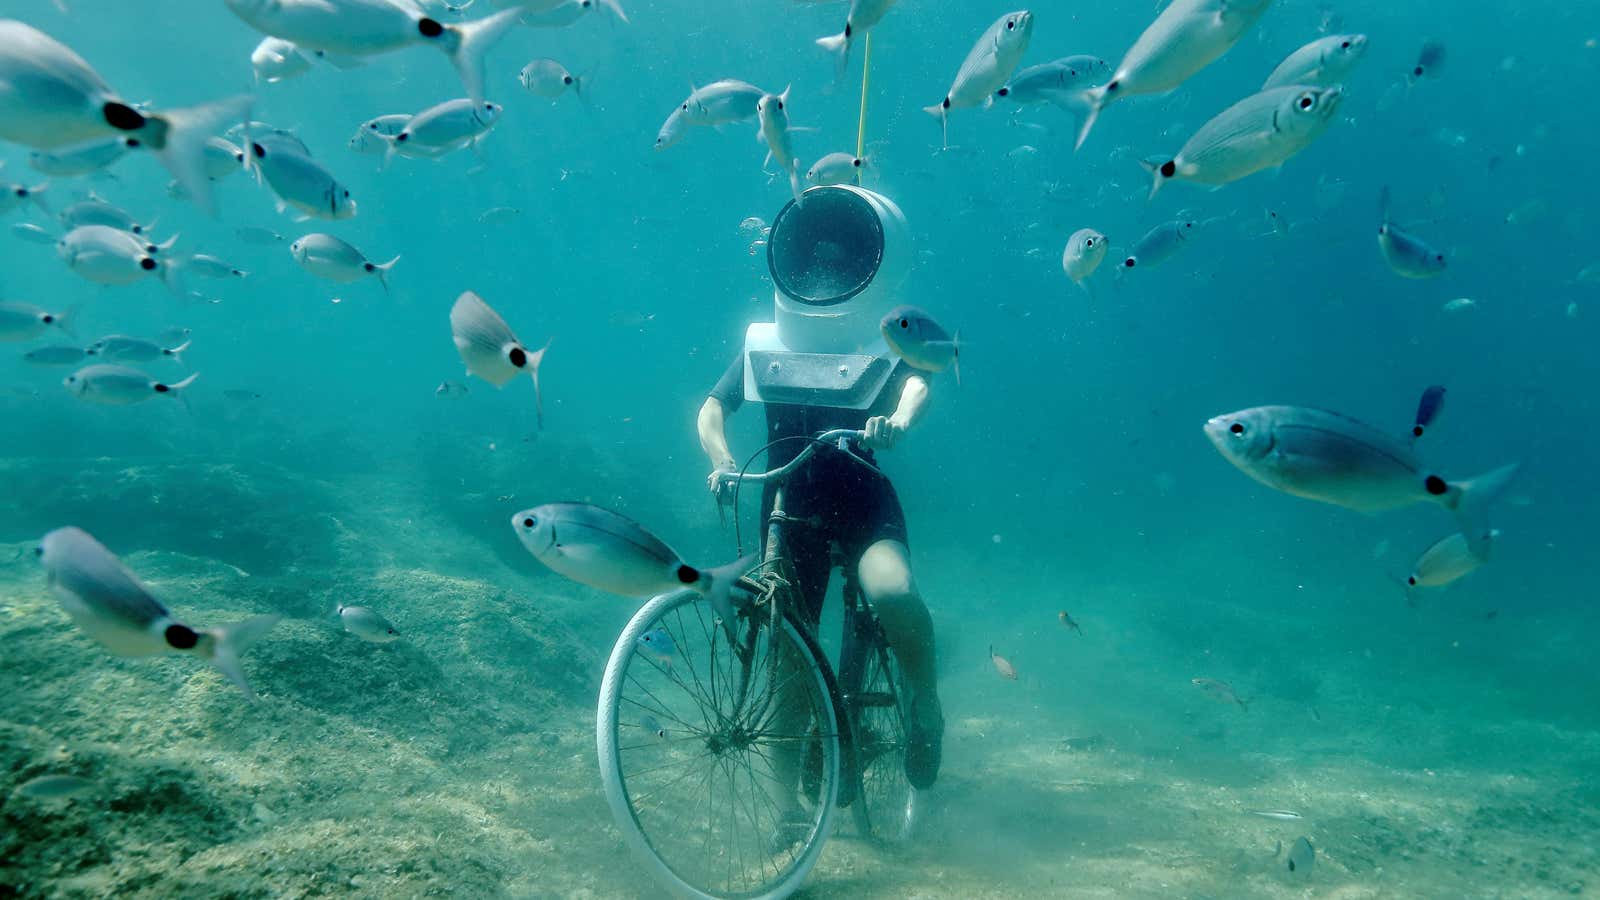 Useless as a bicycle underwater.